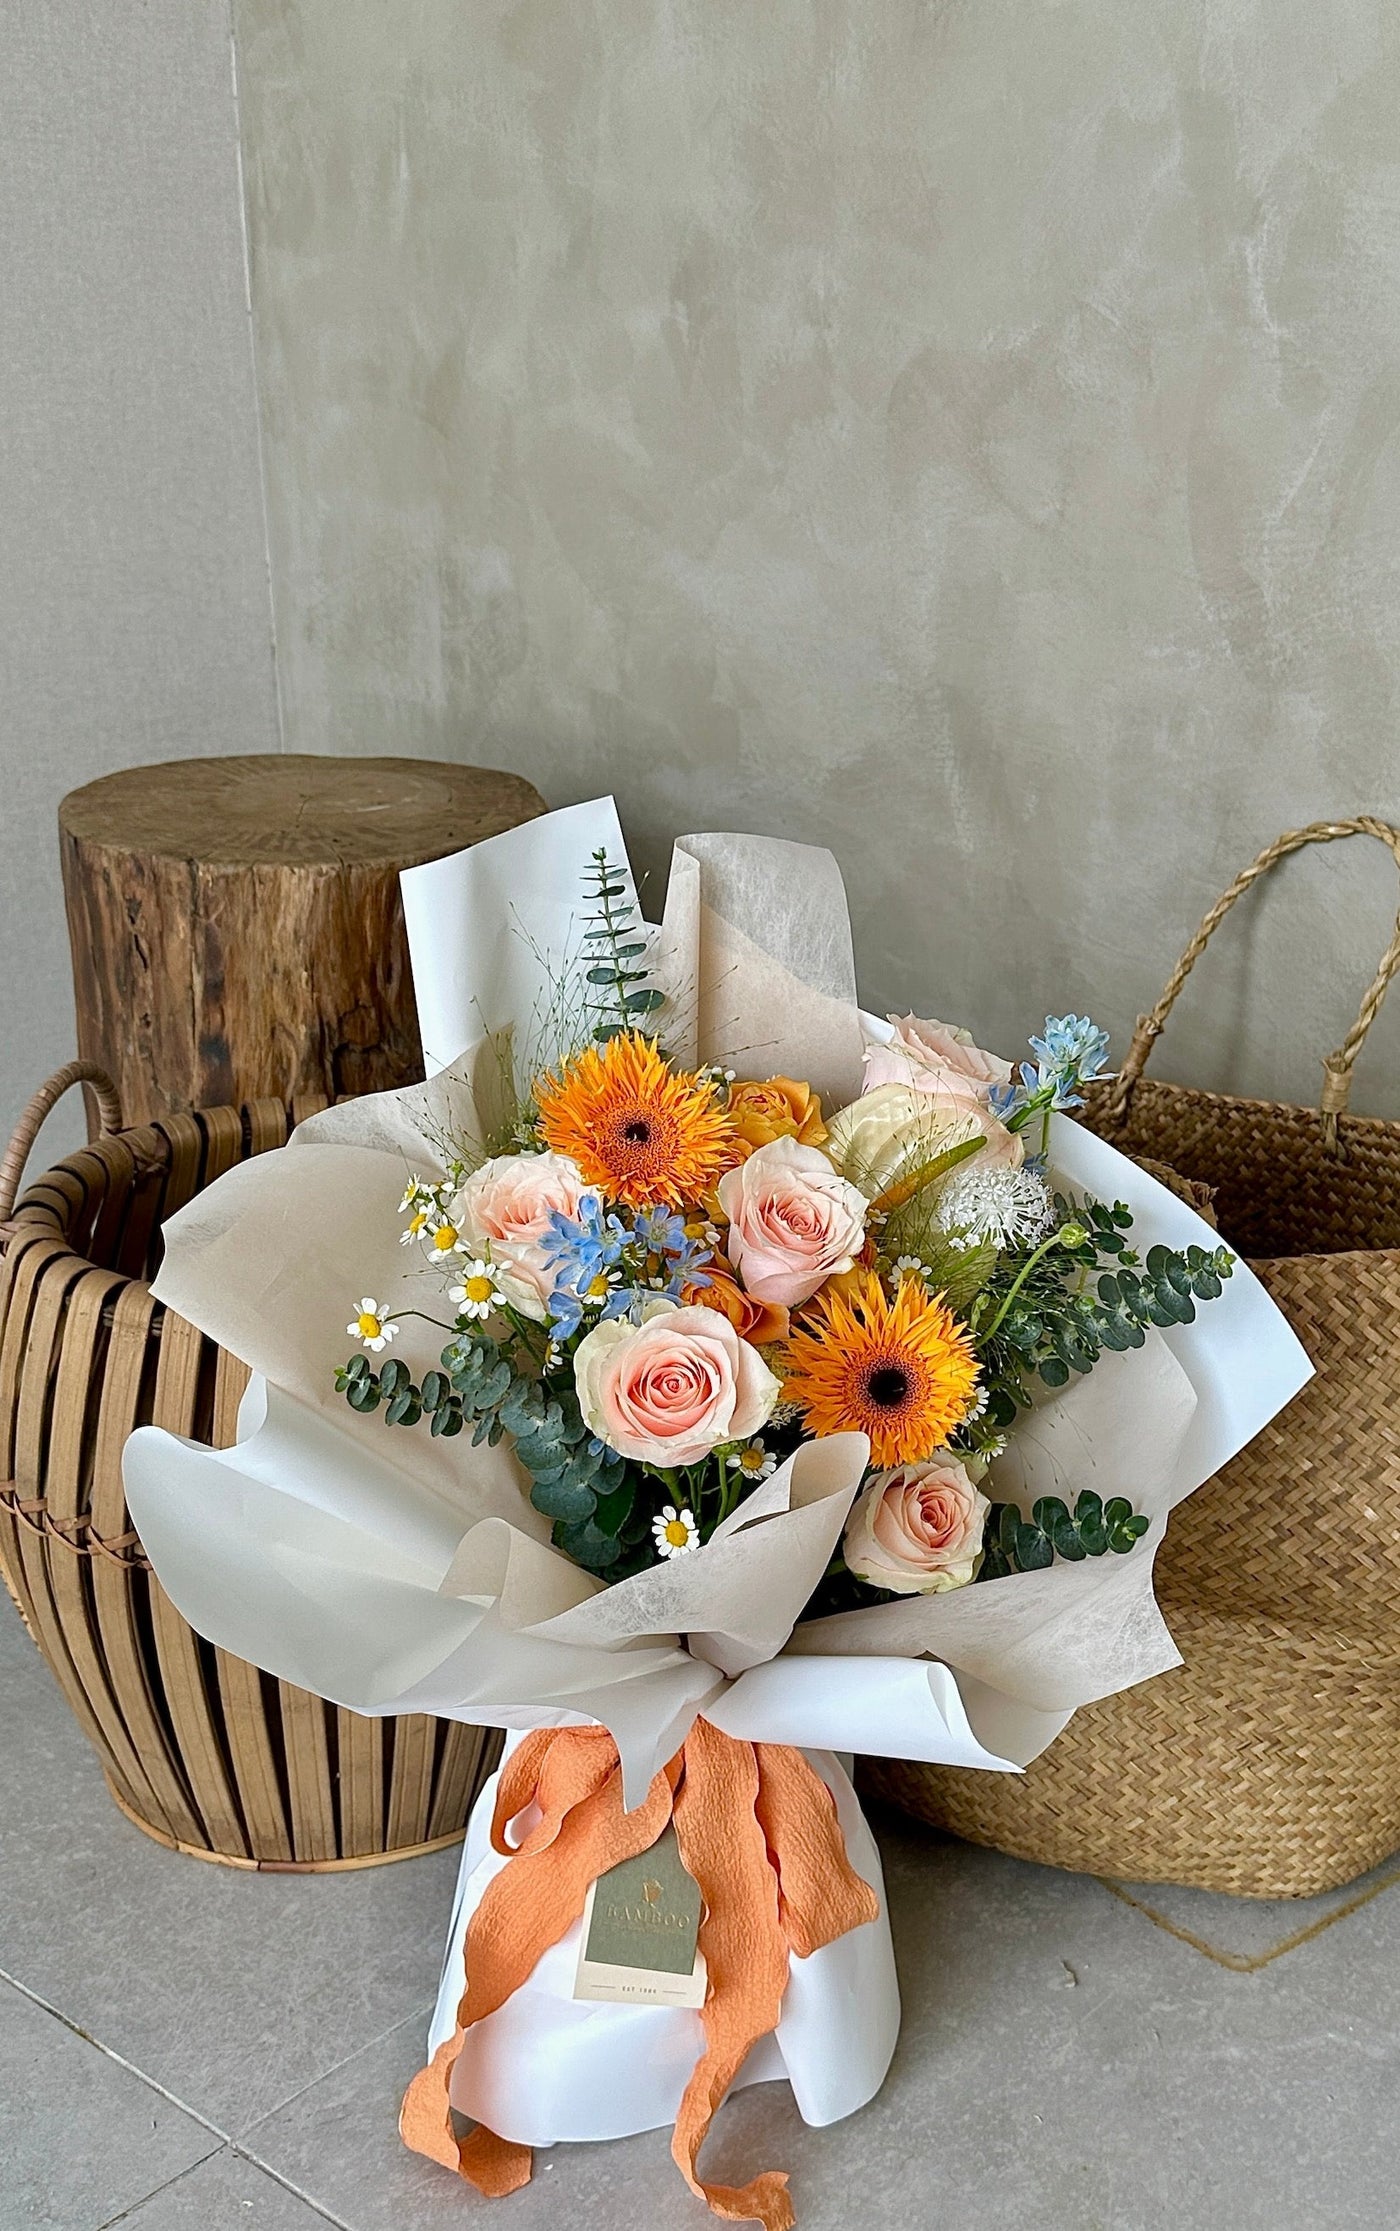 "Toasting to the woman who taught me everything I know about making the perfect slice of toast. Happy Mother's Day!"   Celebrate the magic mom-ents with this mixed bouquet features orange daisies, orange rose spray,  peach roses, seasonal fillers in a warm hues.   Standard: 10 main flowers + fillers , bouquet height approximate 40cm  Wowsome: 20 main flowers + fillers , bouquet height approximate 50cm